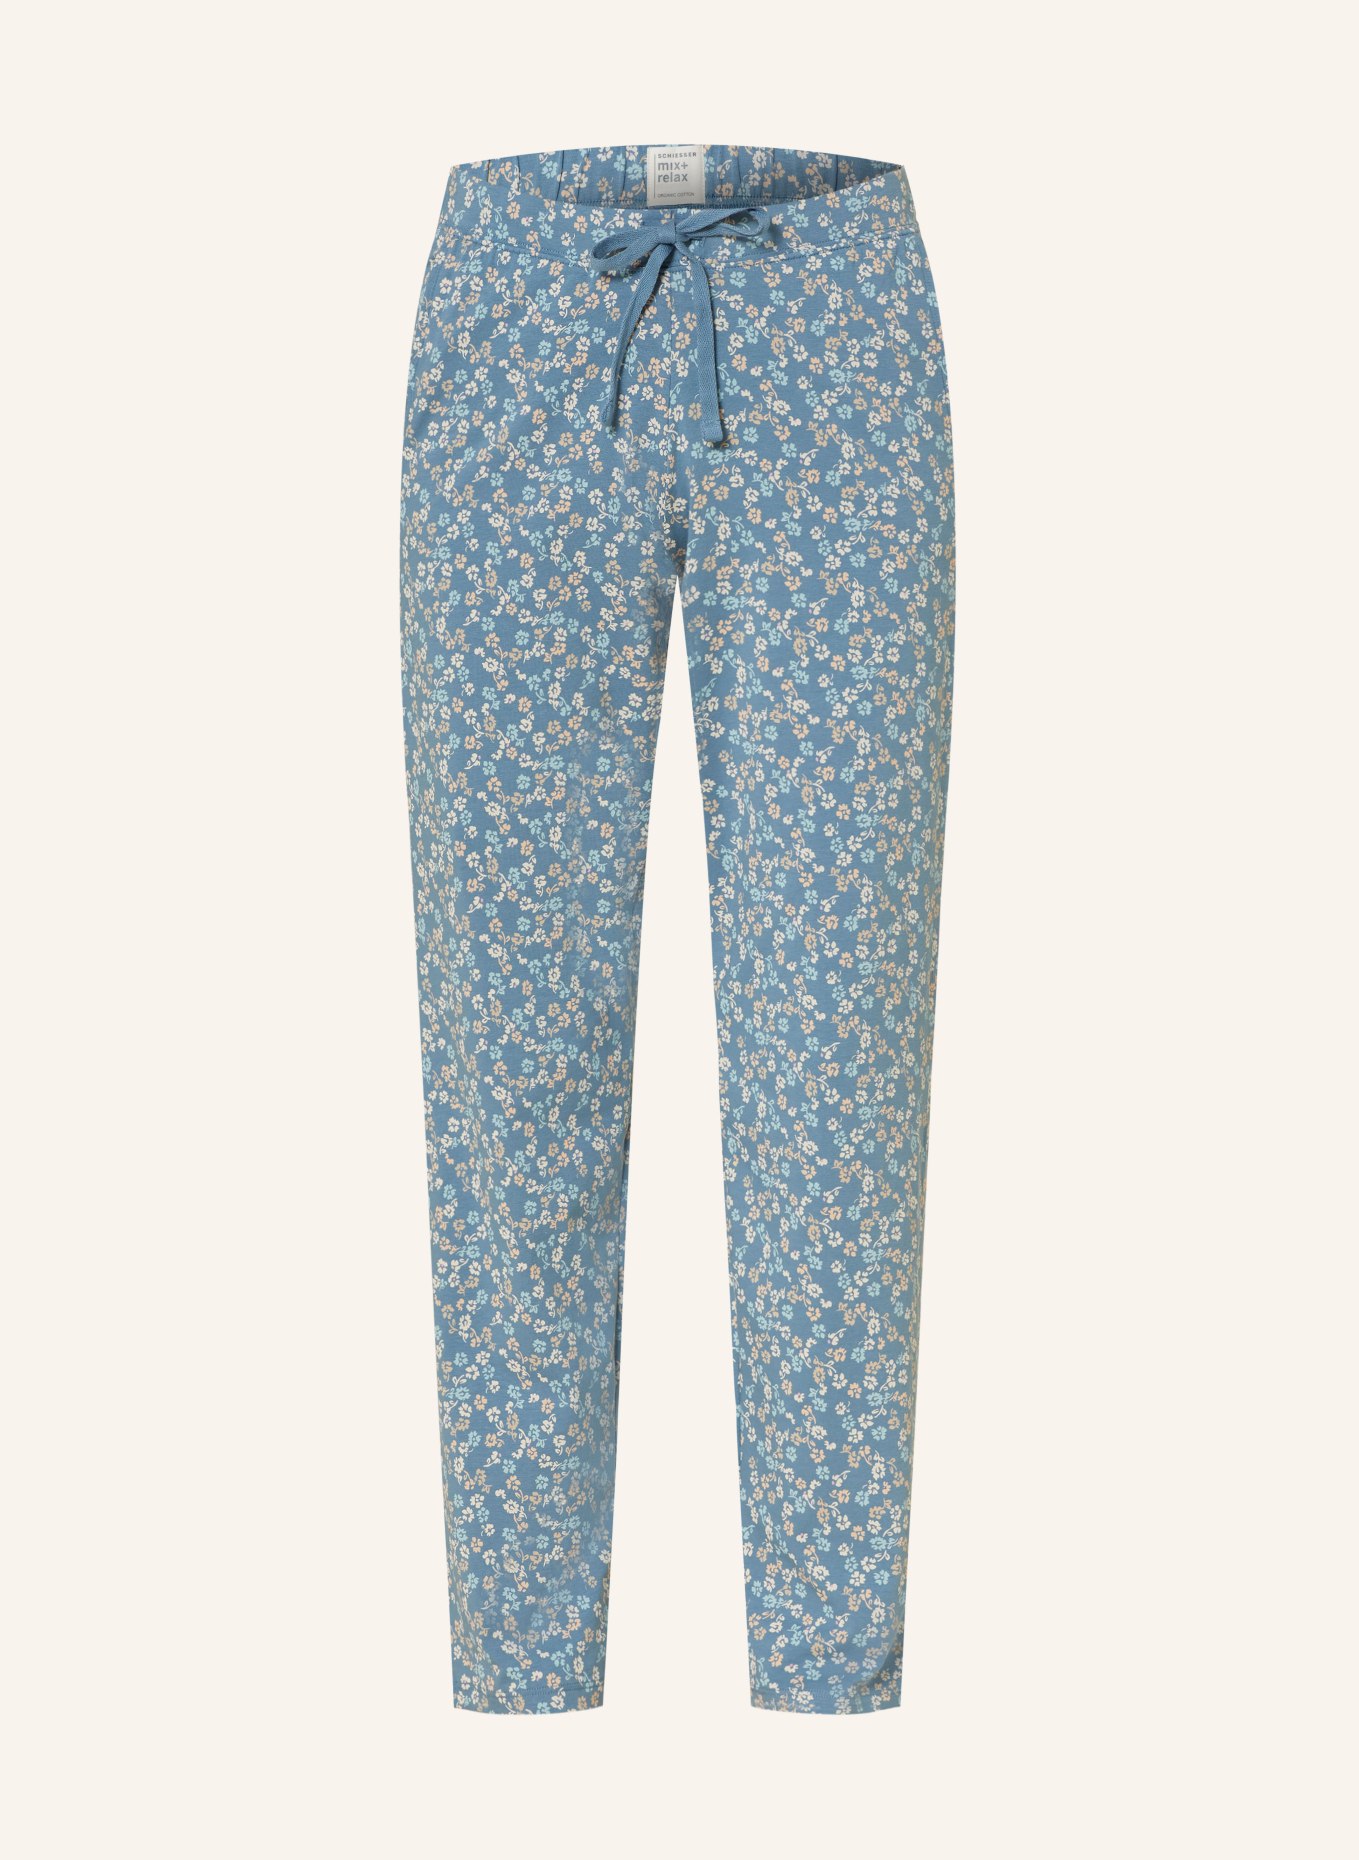 SCHIESSER Pajama pants MIX+RELAX, Color: BLUE GRAY (Image 1)